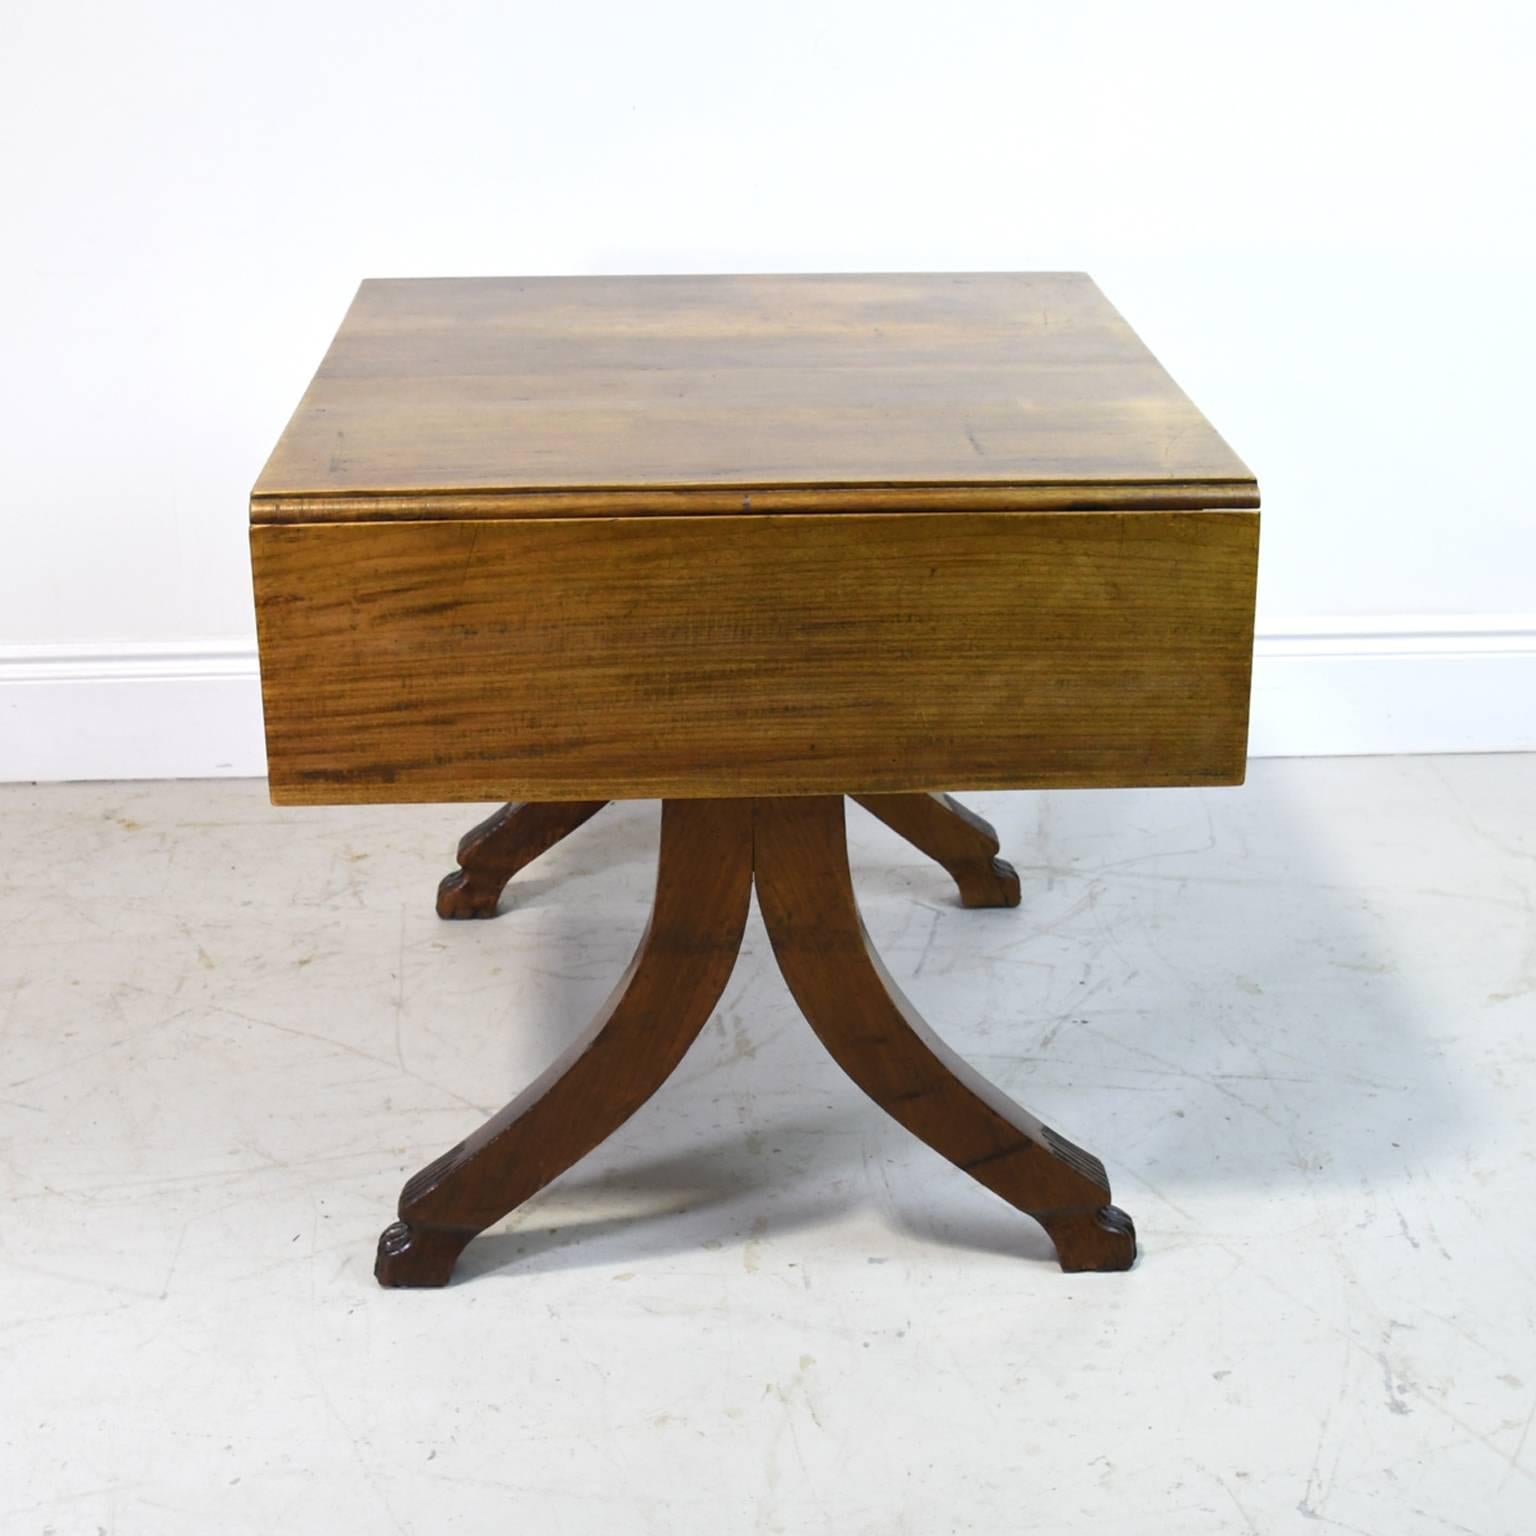 19th Century Italian Empire Writing Table in Mahogany with Marquetry In Good Condition For Sale In Miami, FL